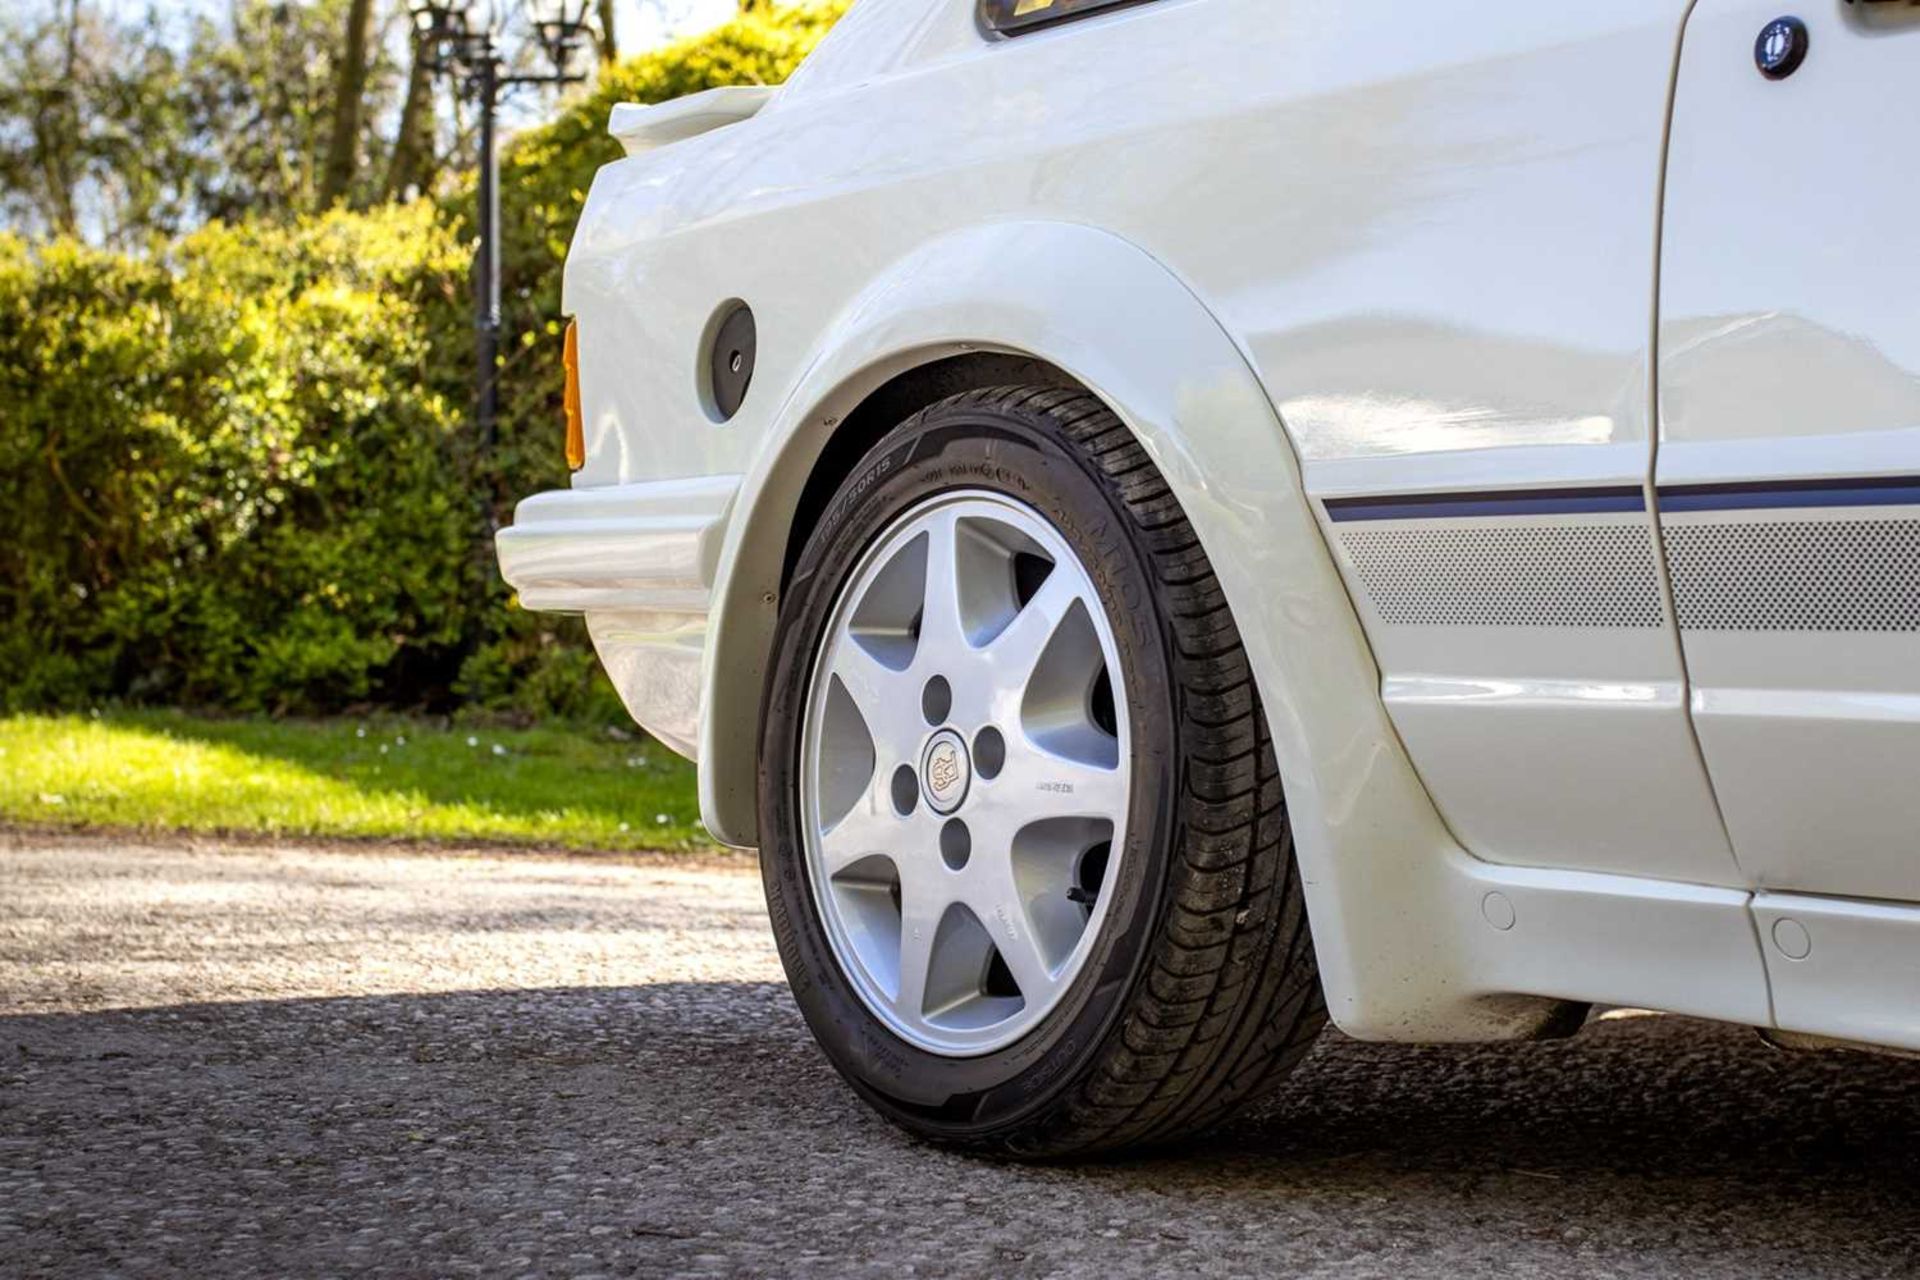 1985 Ford Escort RS Turbo S1 Subject to a full restoration  - Image 38 of 76